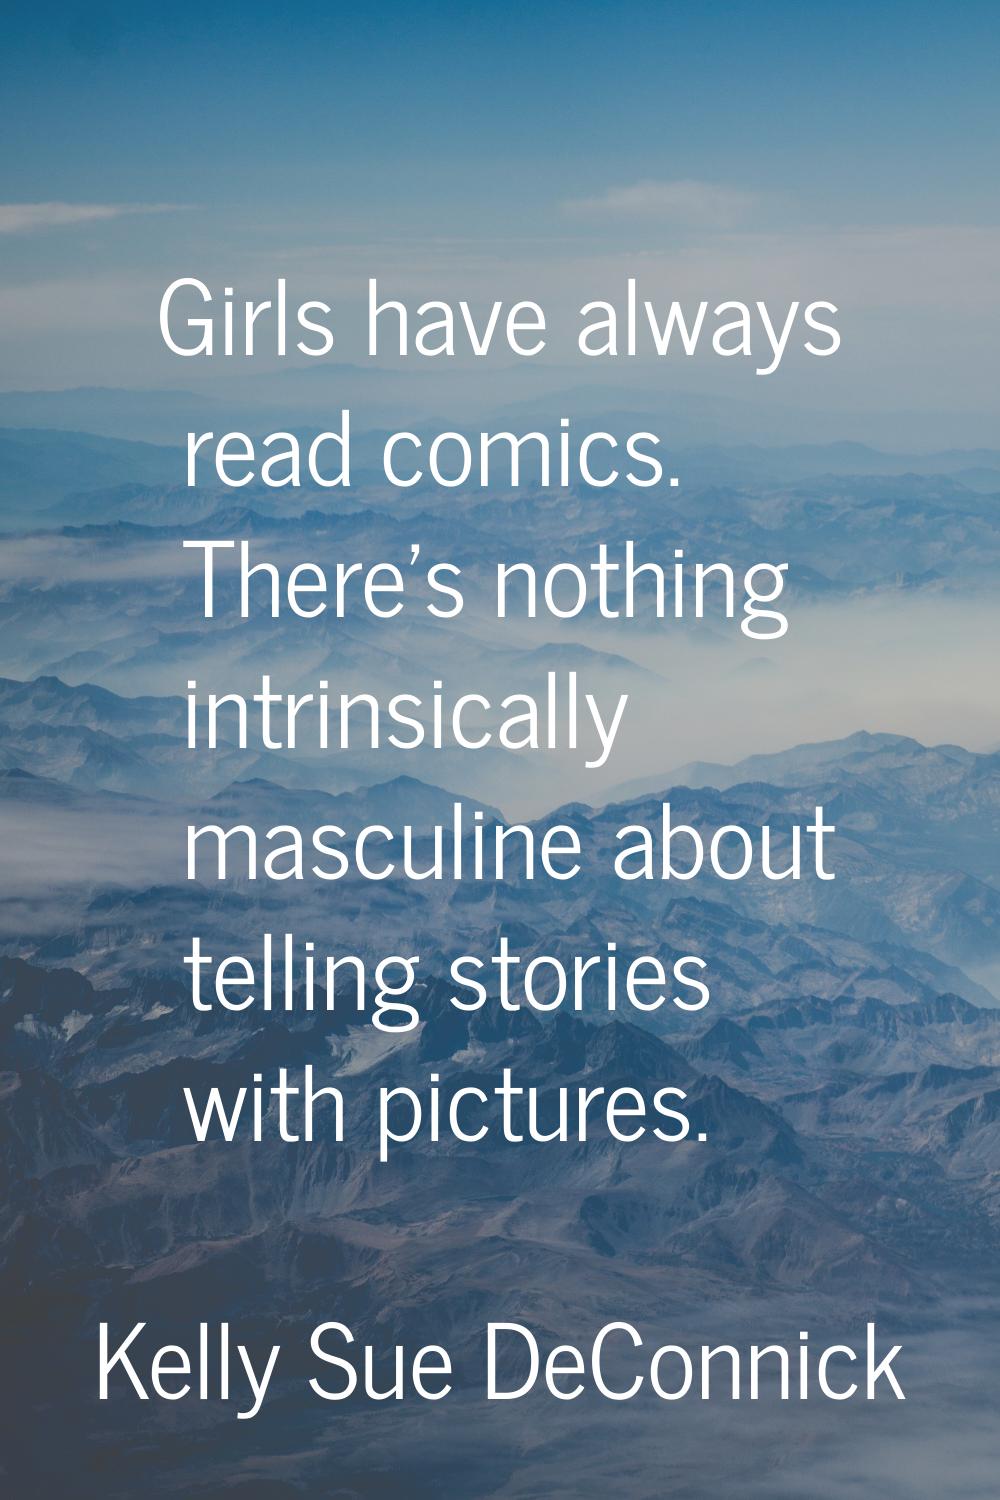 Girls have always read comics. There's nothing intrinsically masculine about telling stories with p